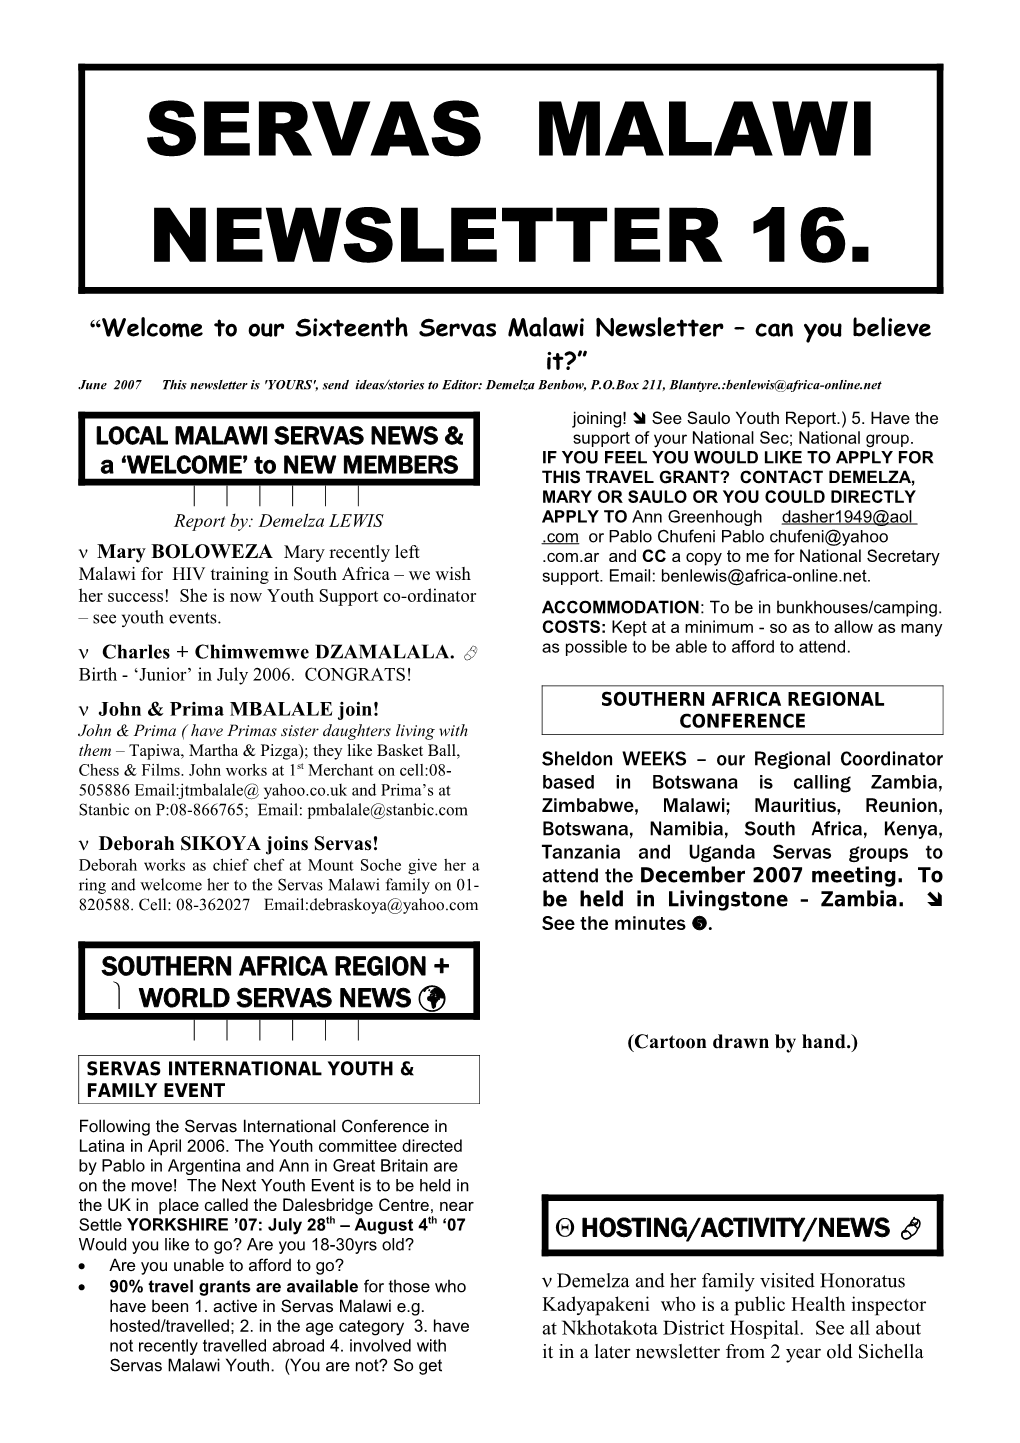 Welcome to Our Sixteenth Servas Malawi Newsletter Can You Believe It?